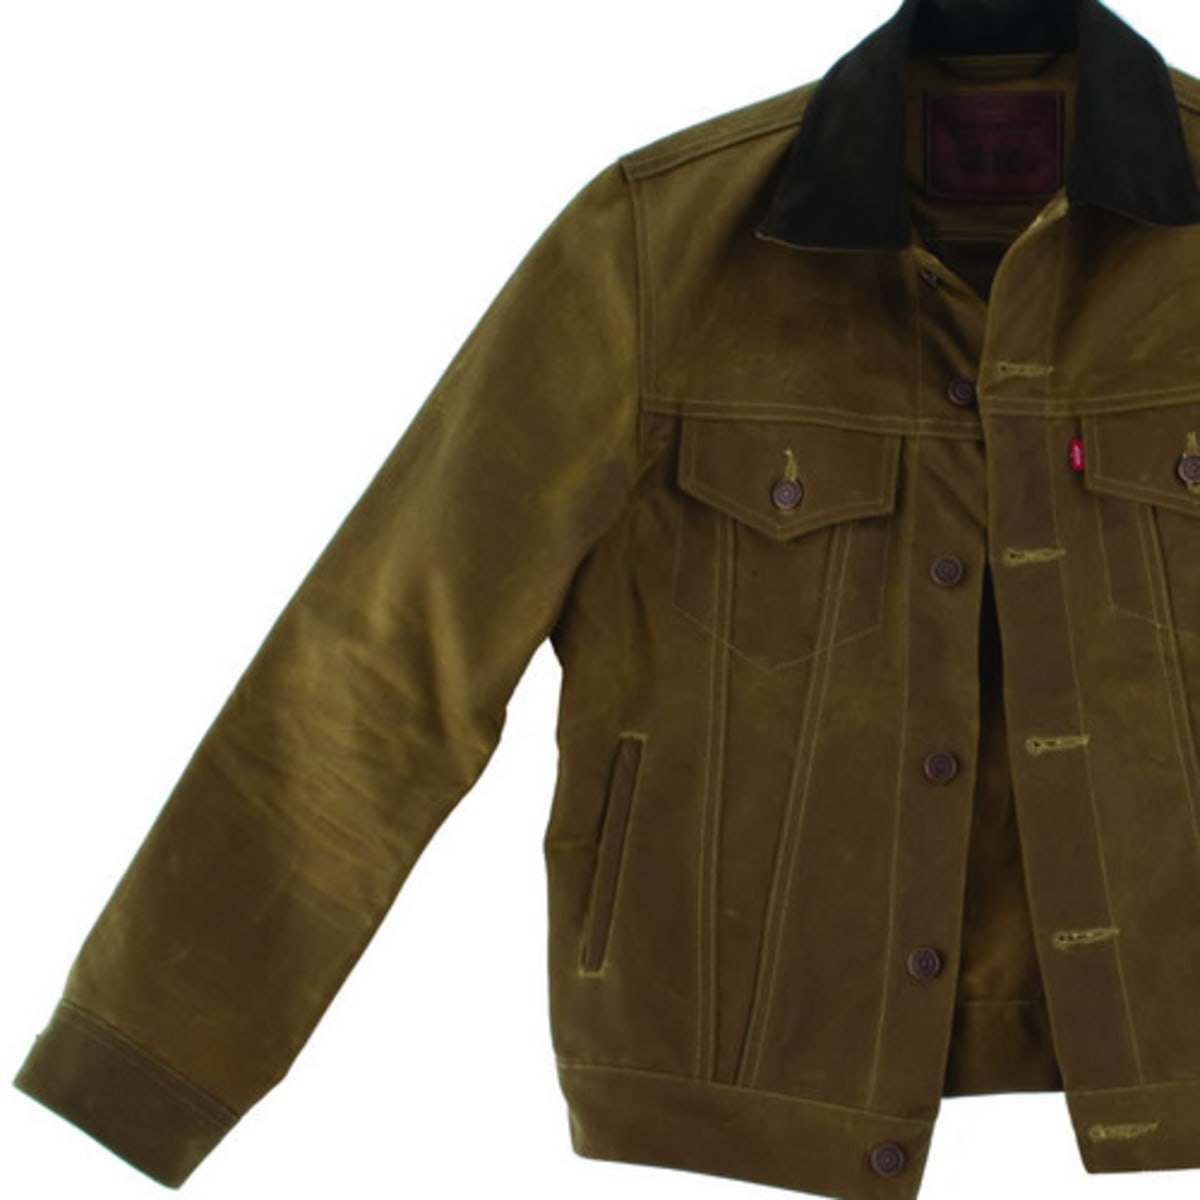 Levi's Workwear by Filson - Acquire